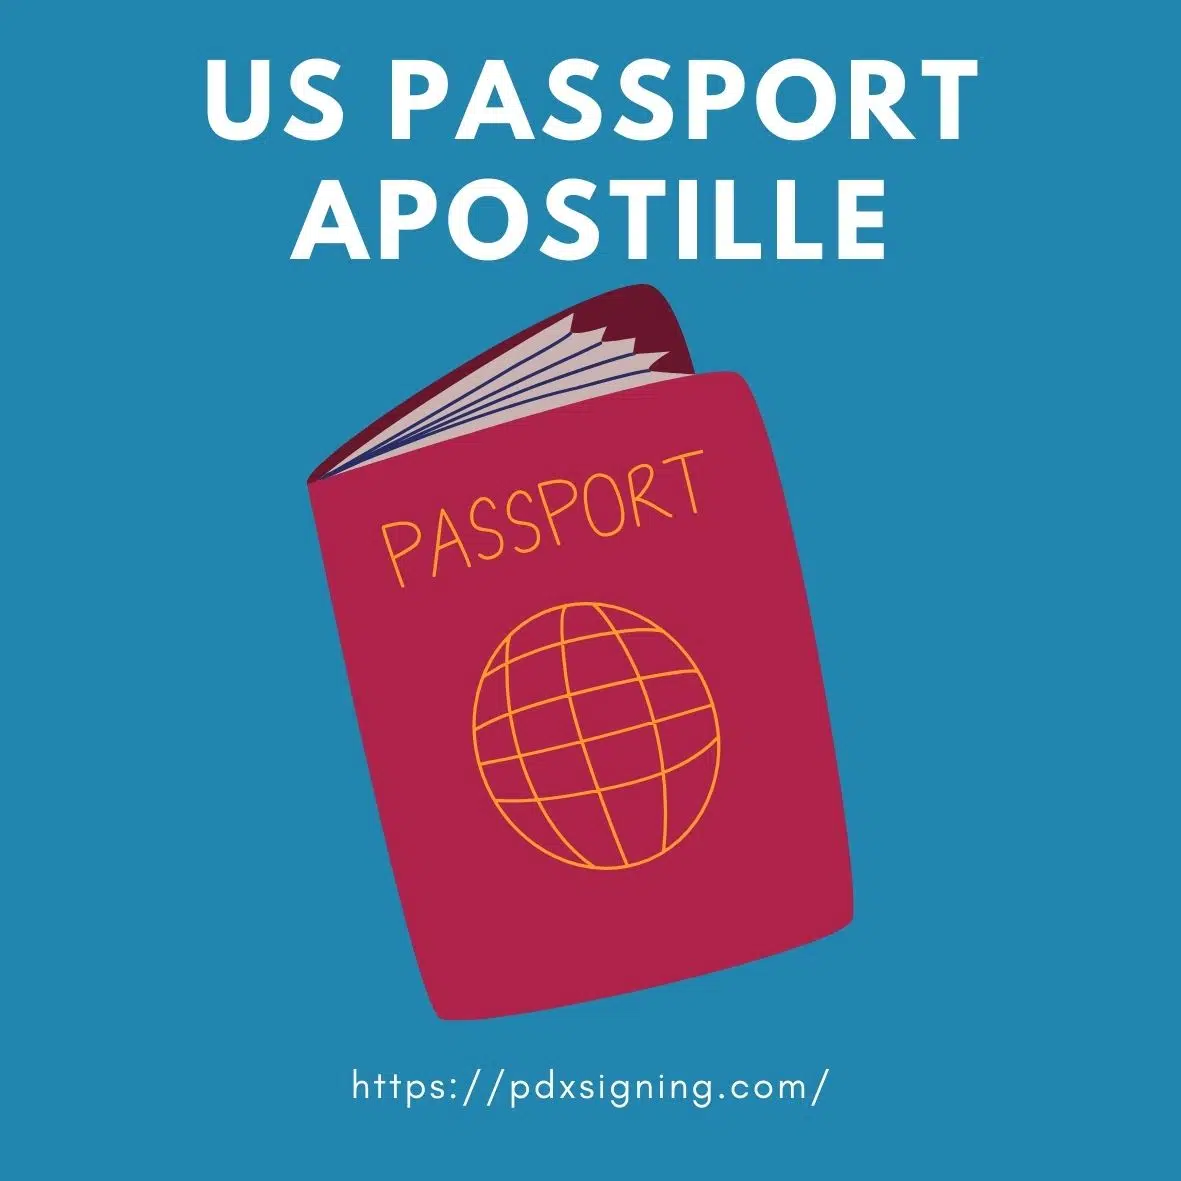 How To Apostille A Passport In The US?